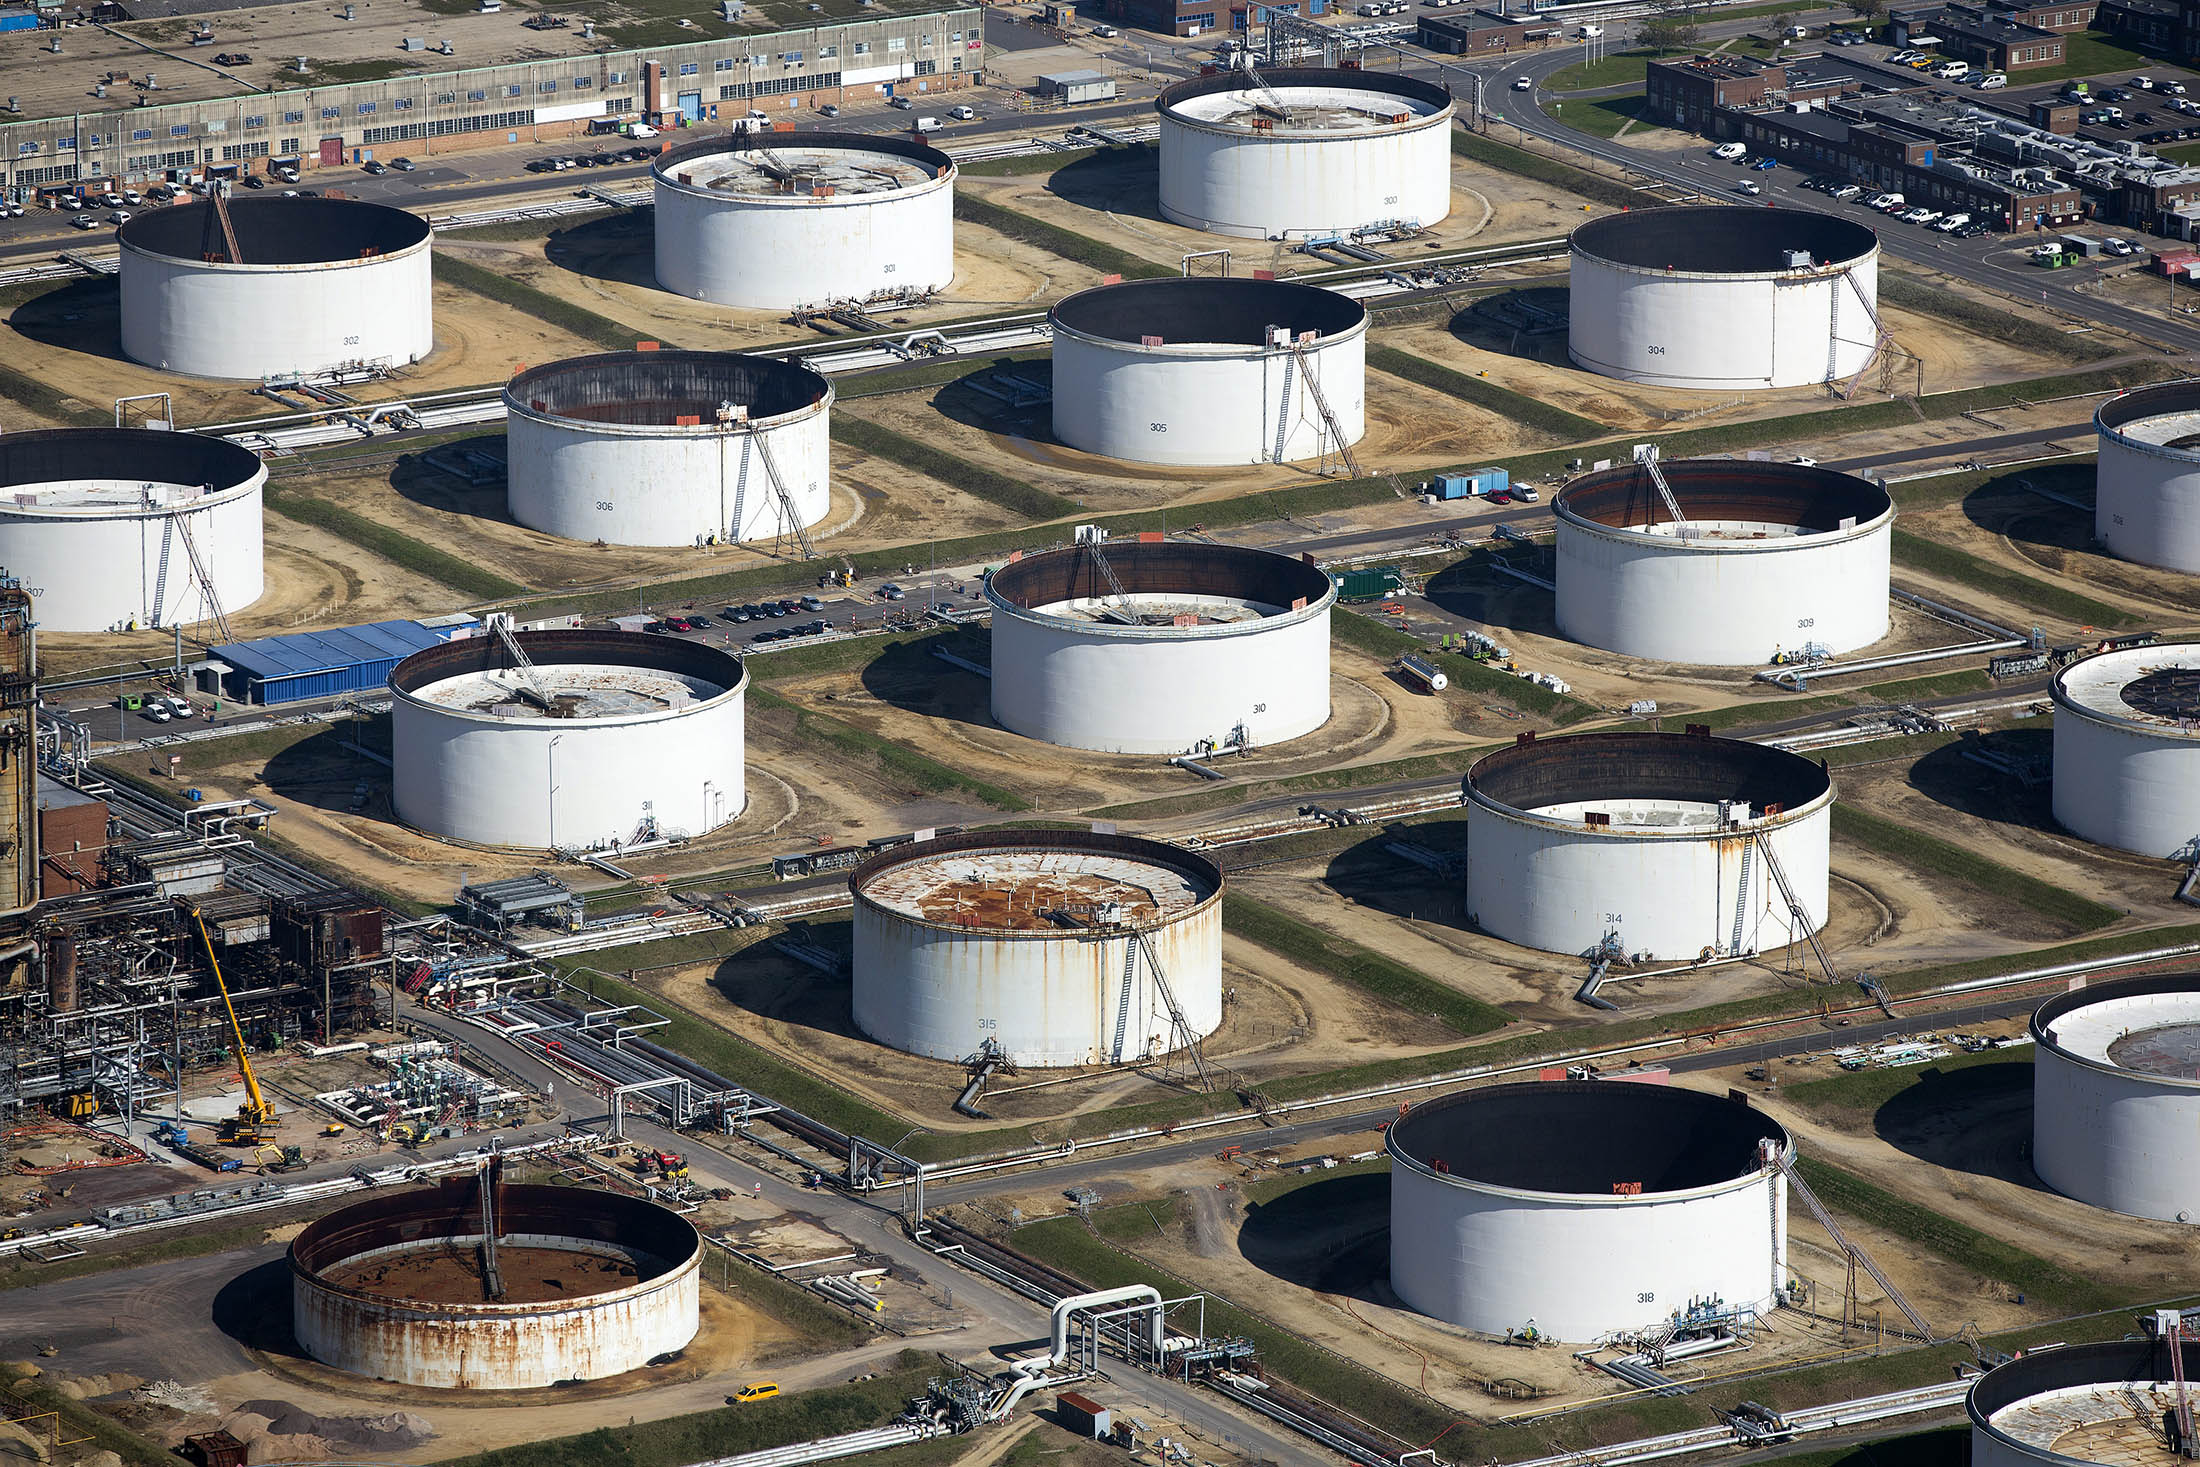 Oil storage tanks sit at the Esso oil refinery, operated by Exxon Mobil Corp. in Fawley, U.K., on Friday, Oct. 2, 2015. A 50 percent drop in crude prices in the past year has hit earnings for oil and gas producers, forcing them to slash capital spending and scale back unprofitable operations.
